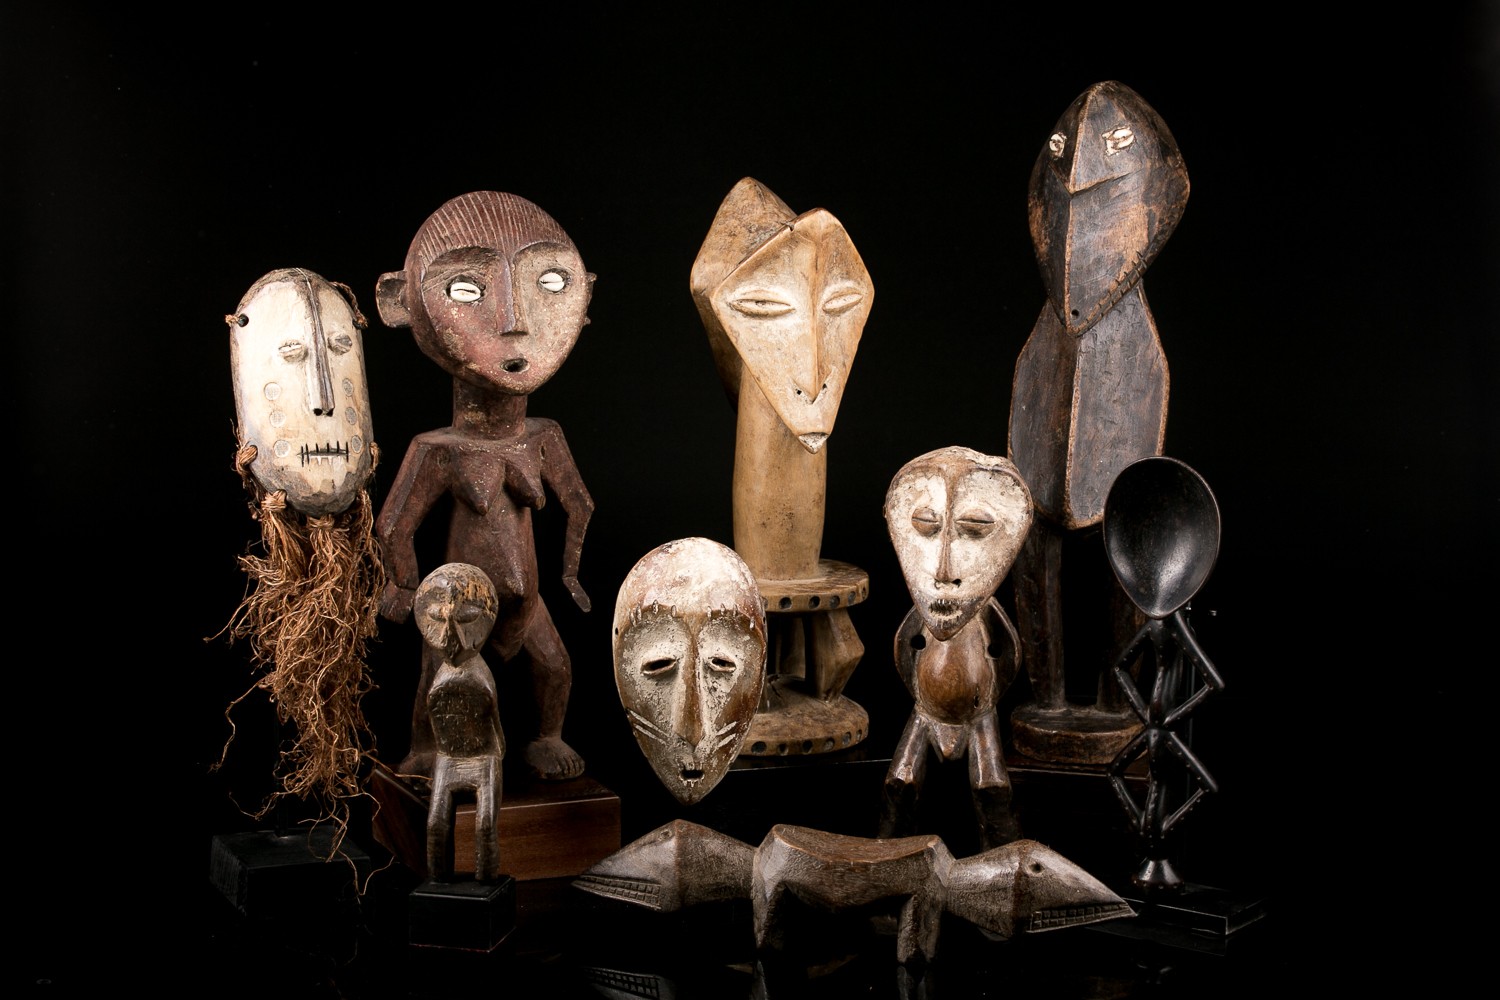 Lega: Art at the service of ancestors and initiation Héritage Galerie - Art Africain Traditionnel